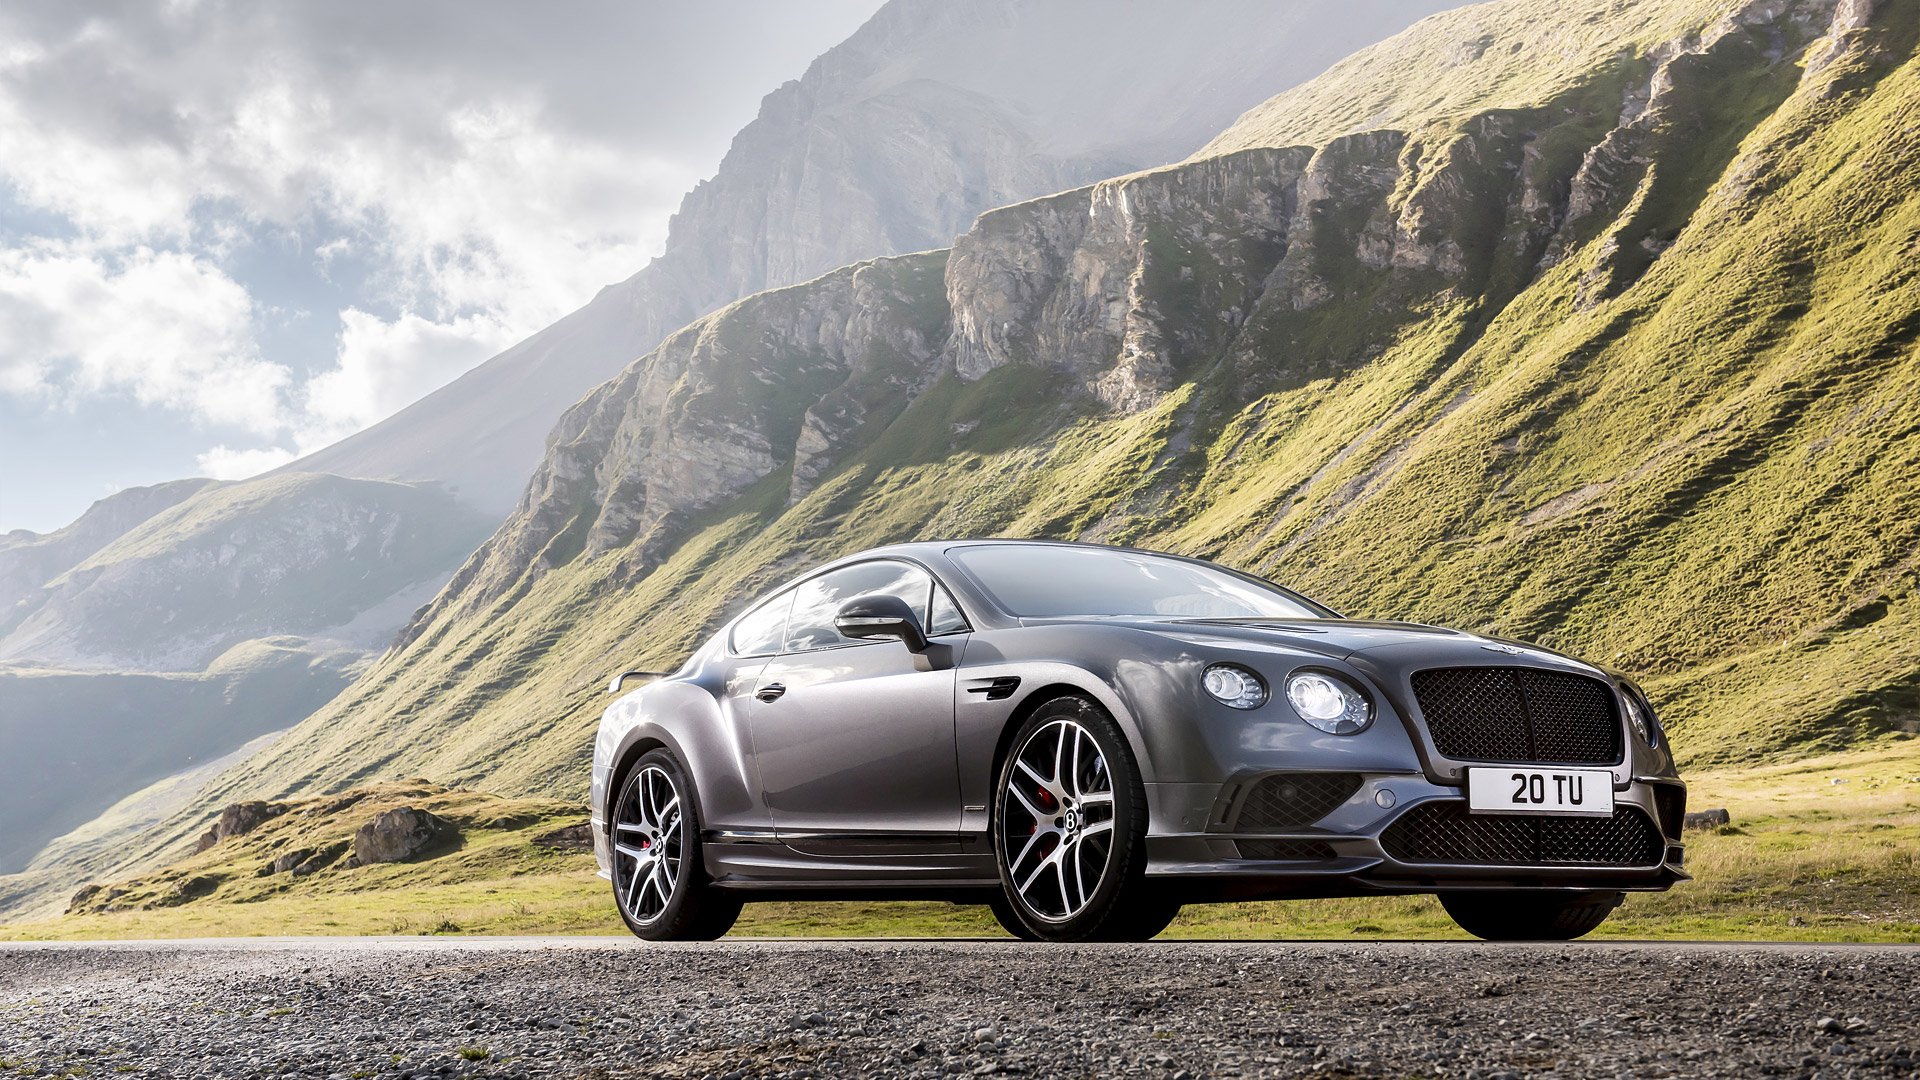 Free Download 2018 Bentley Continental Supersports Wallpapers Hd Images 1920x1080 For Your Desktop Mobile Tablet Explore 30 Bentley Continental Supersports Wallpapers Bentley Continental Supersports Wallpapers Bentley Continental Wallpapers